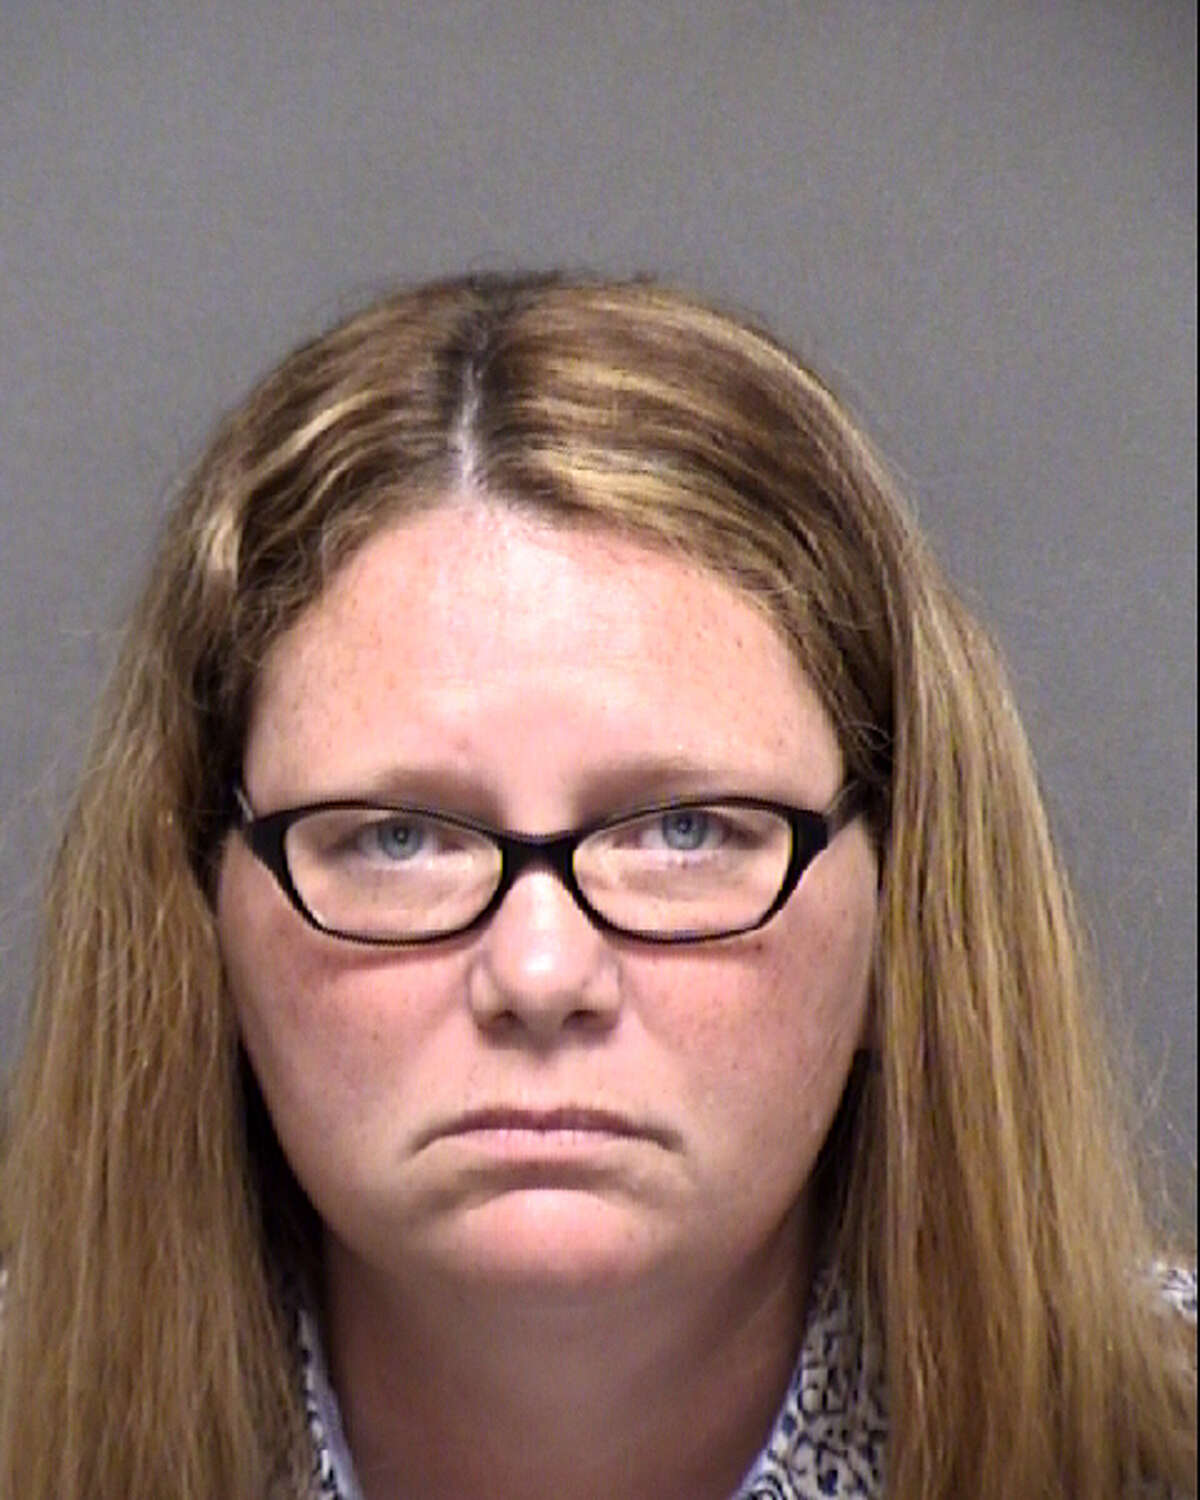 Cindy Wojtaszek, 45, is accused of stealing more than $800,000 from her employer in a six-year span.